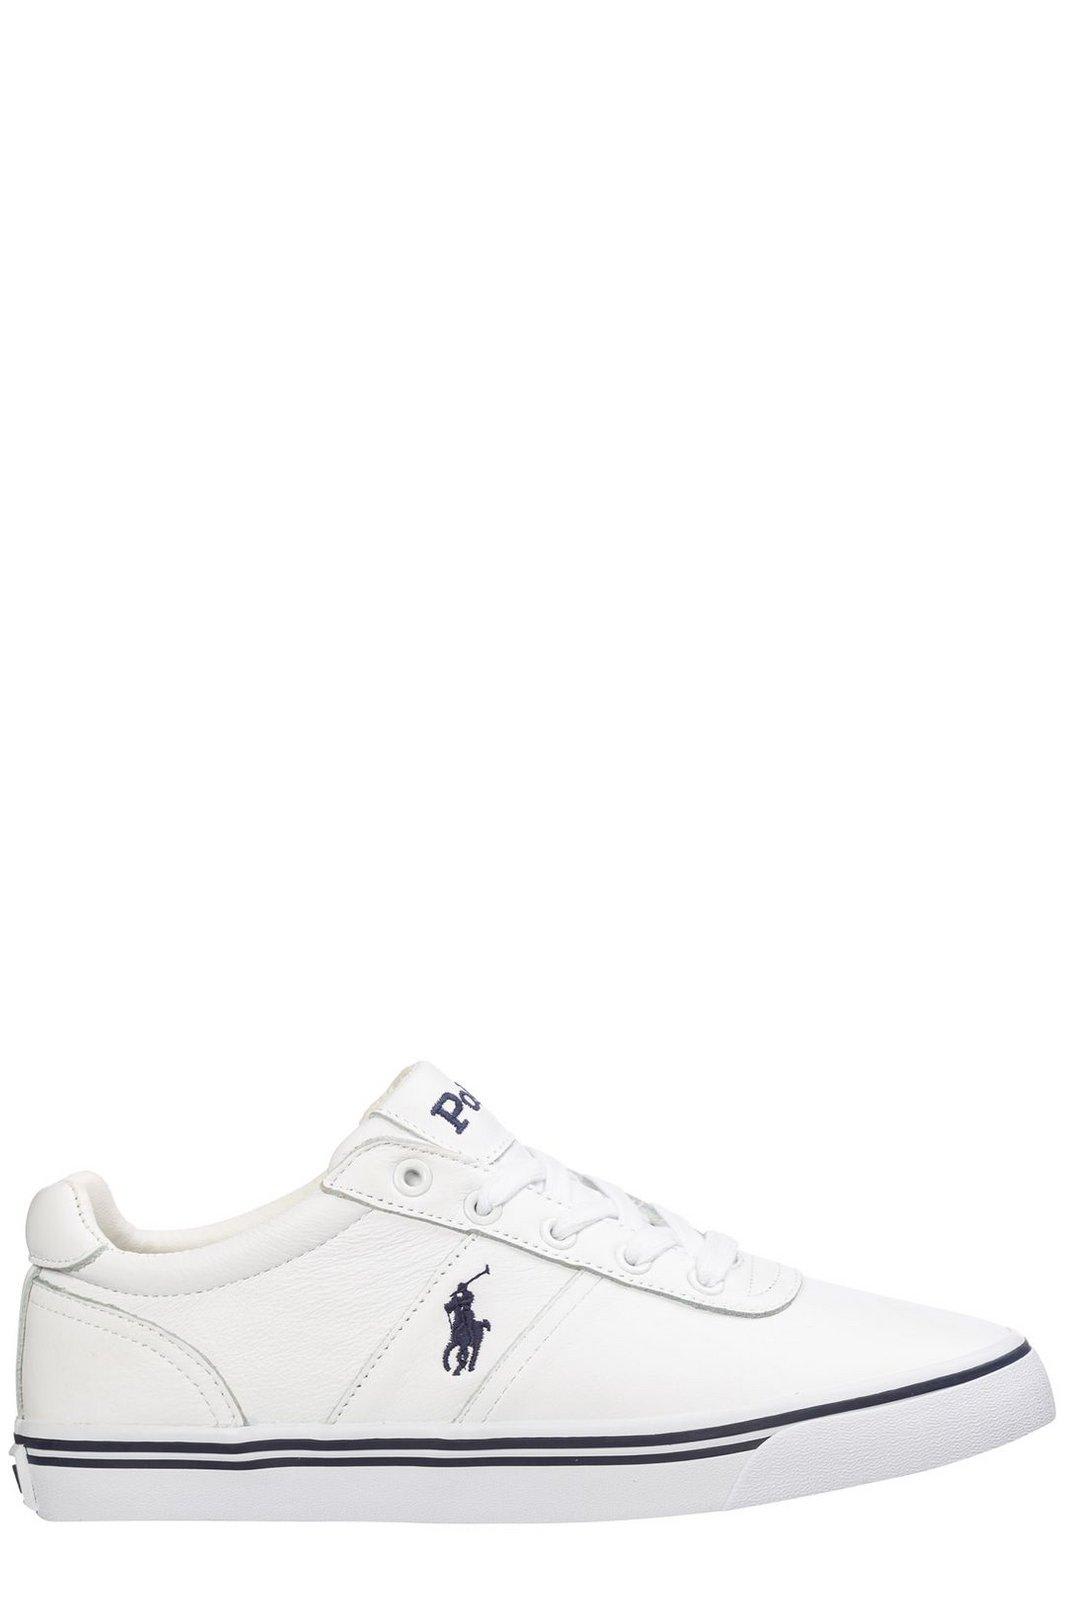 Ralph Lauren Round Toe Lace-up Sneakers